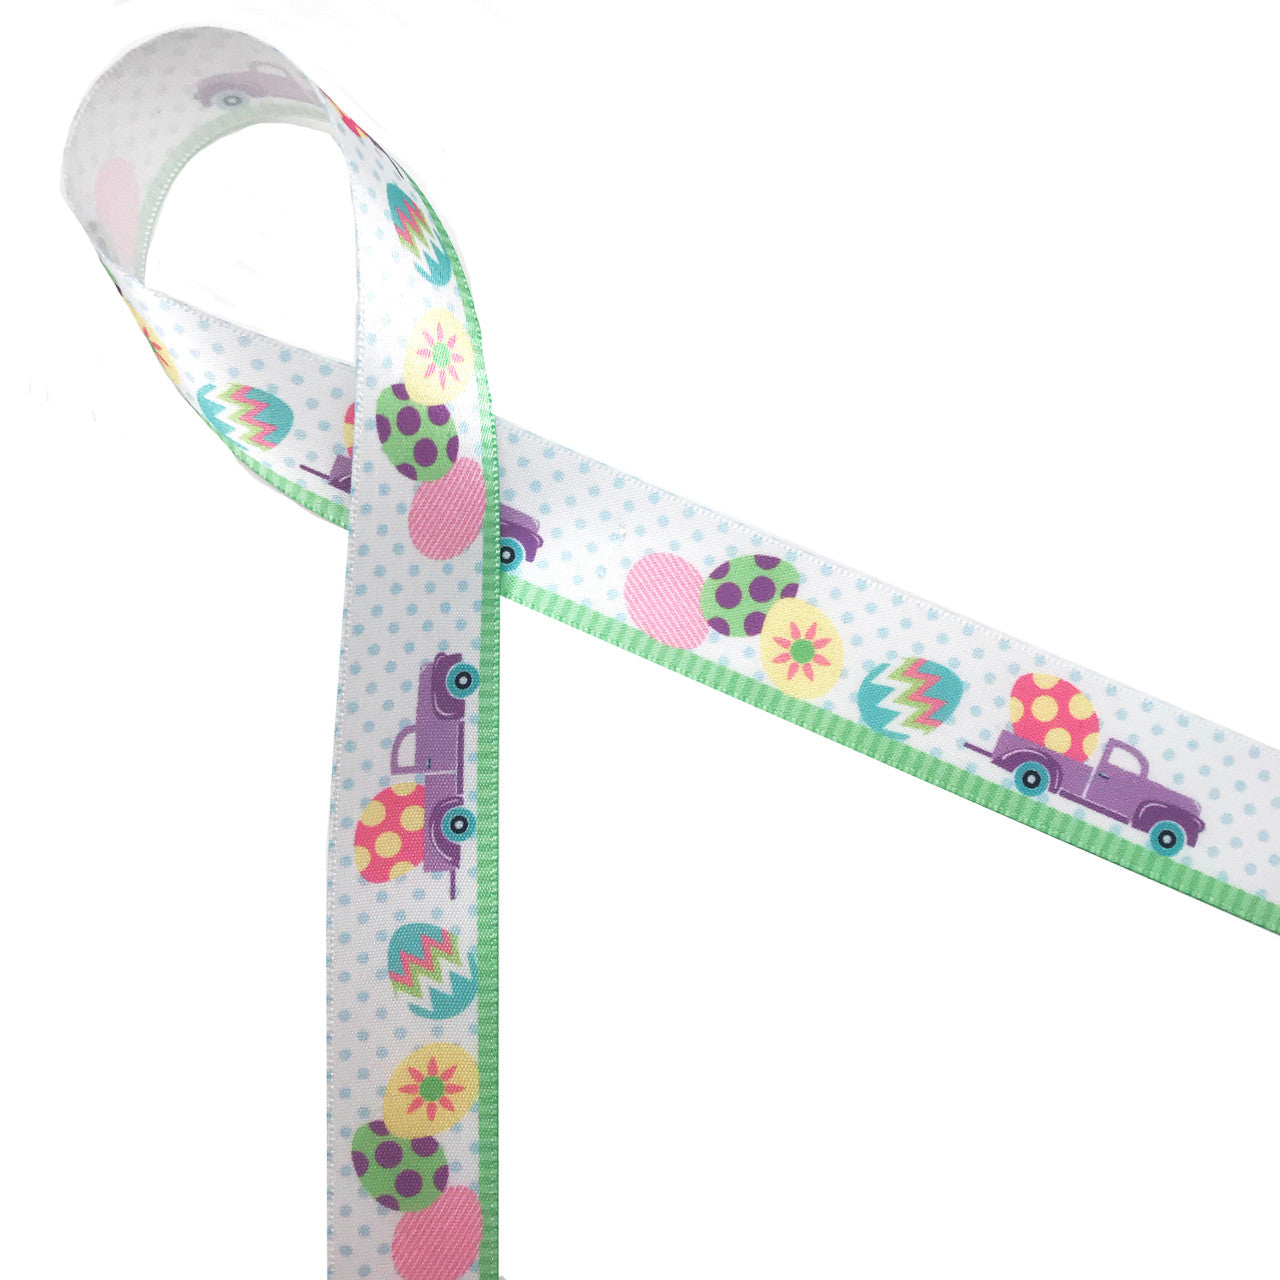 Lavender Egg truck with a large Easter egg in the flat bed and eggs along the ground drives along  Spring green grass and a polka dot background printed on  7/8" white single face satin ribbon. What a fun ribbon for Easter baskets!!